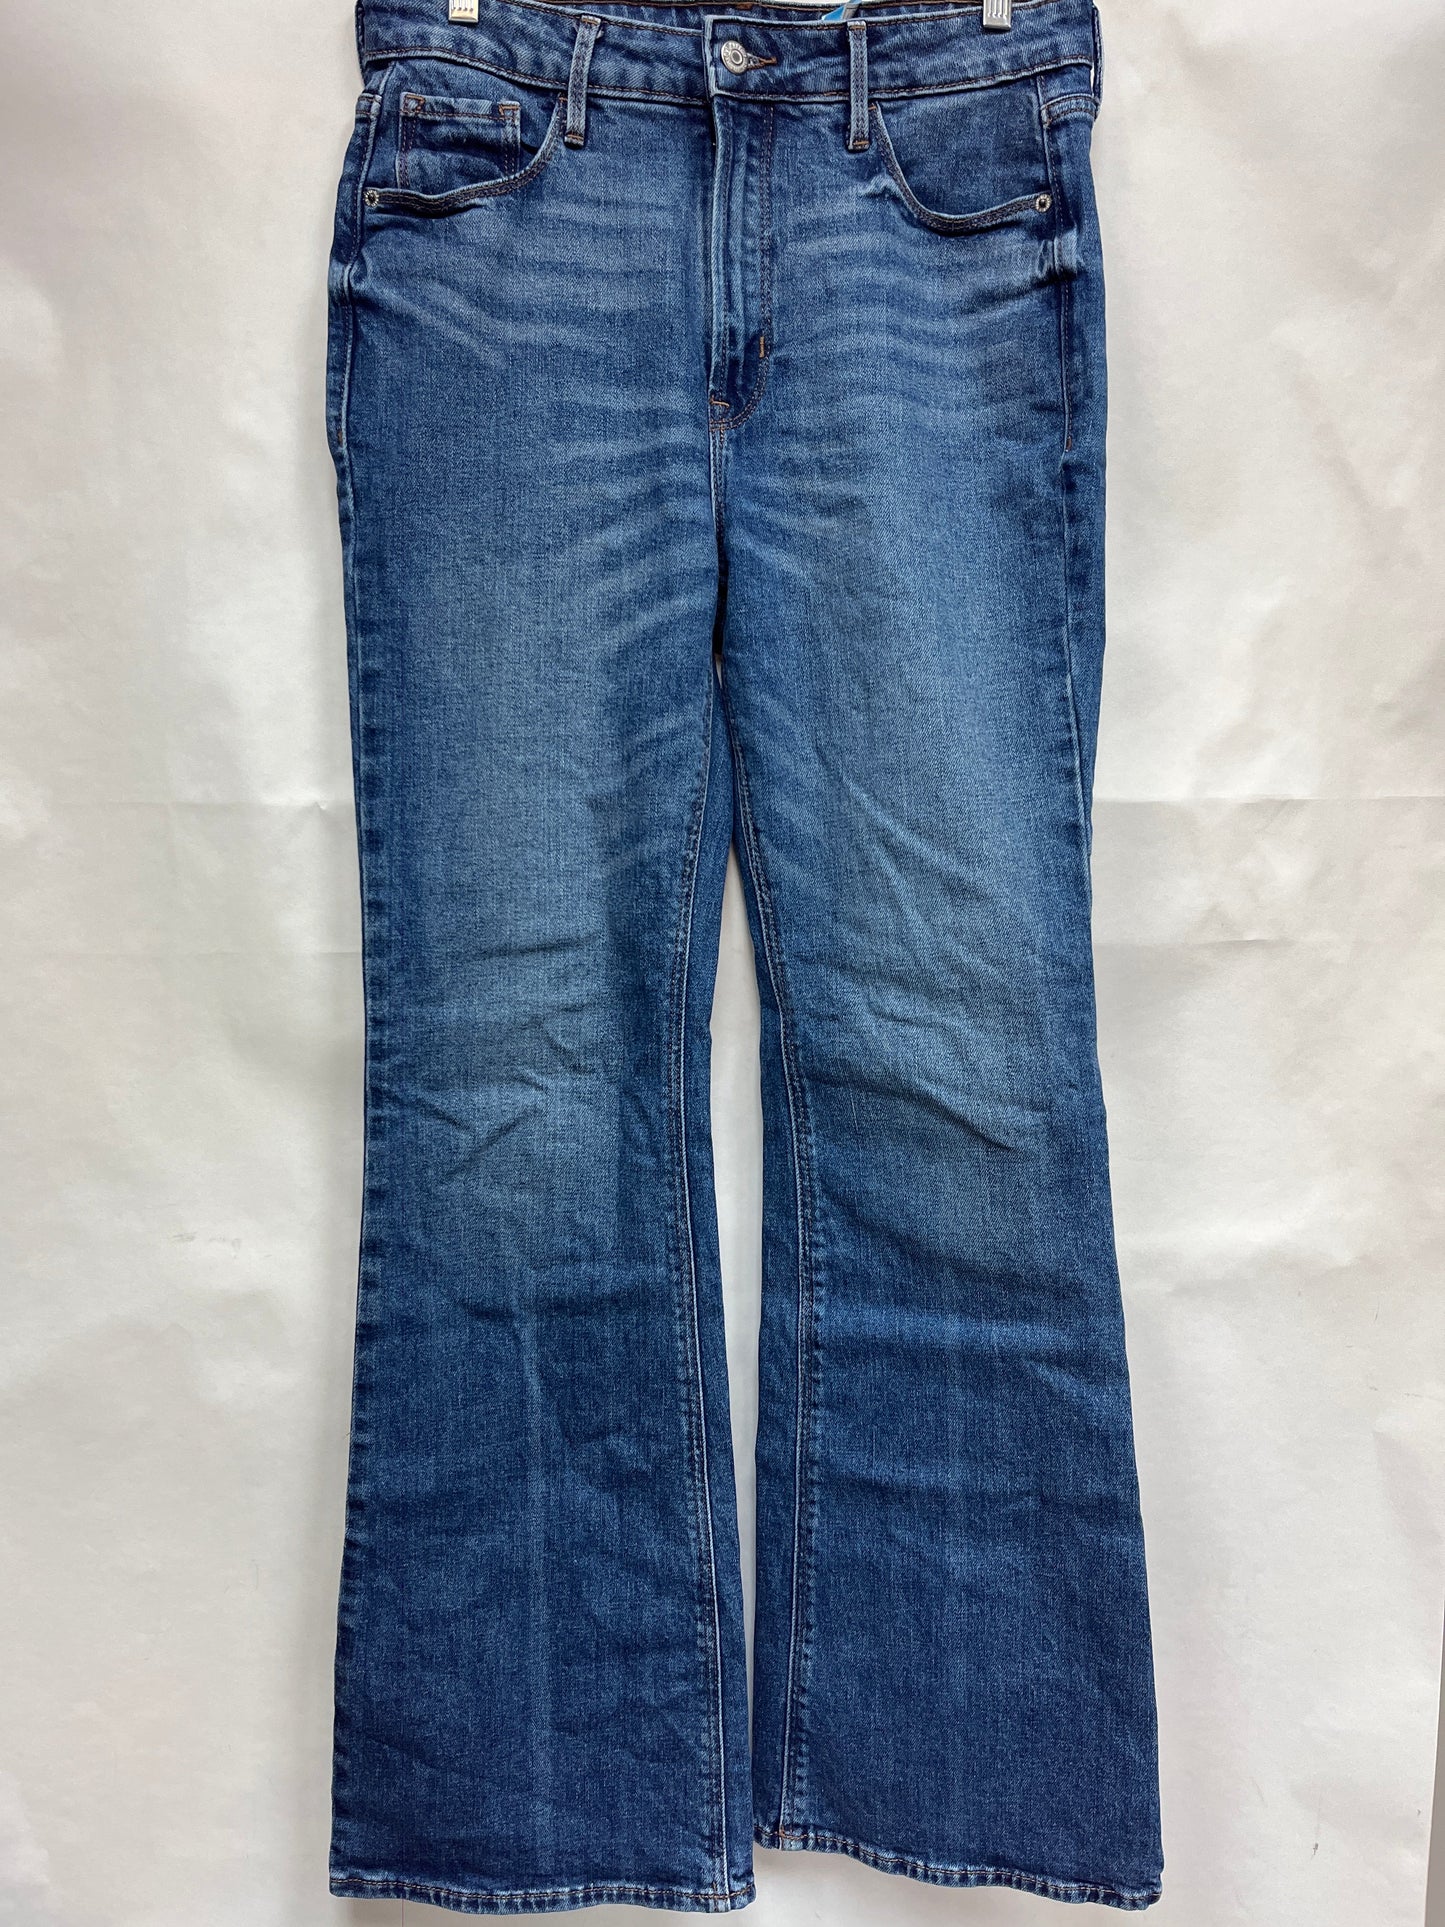 Jeans Boot Cut By Old Navy  Size: 8